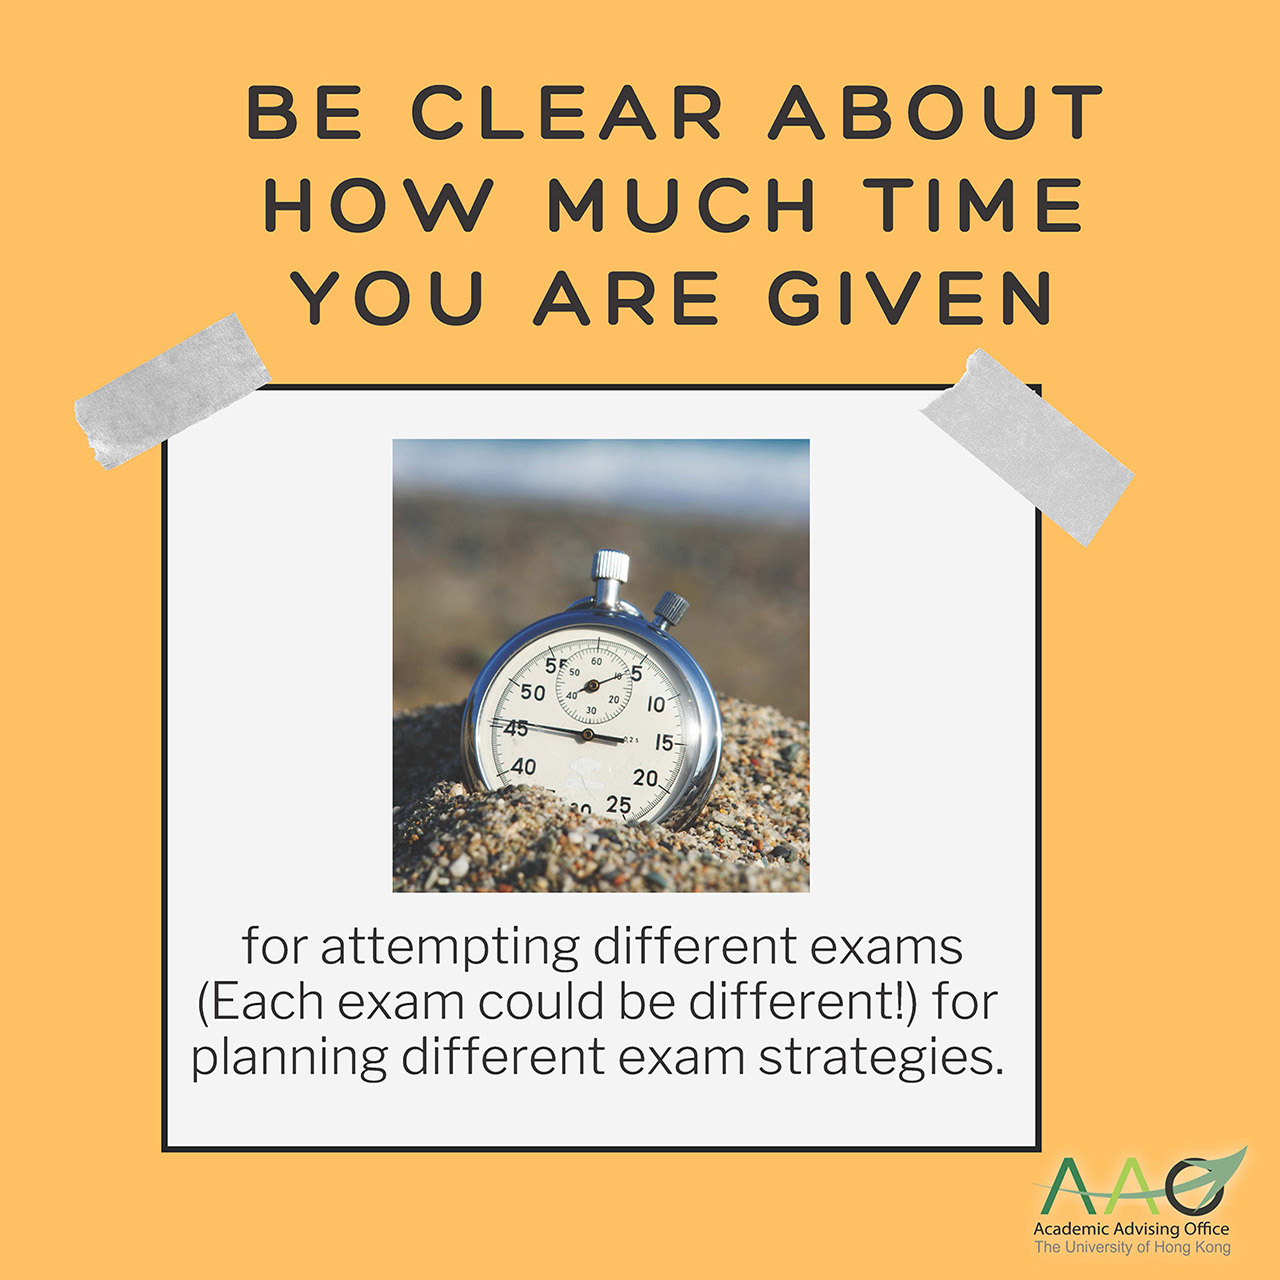 Be clear about how much time you are given for attempting different exams (Each exam could be different!) for planning different exam strategies.